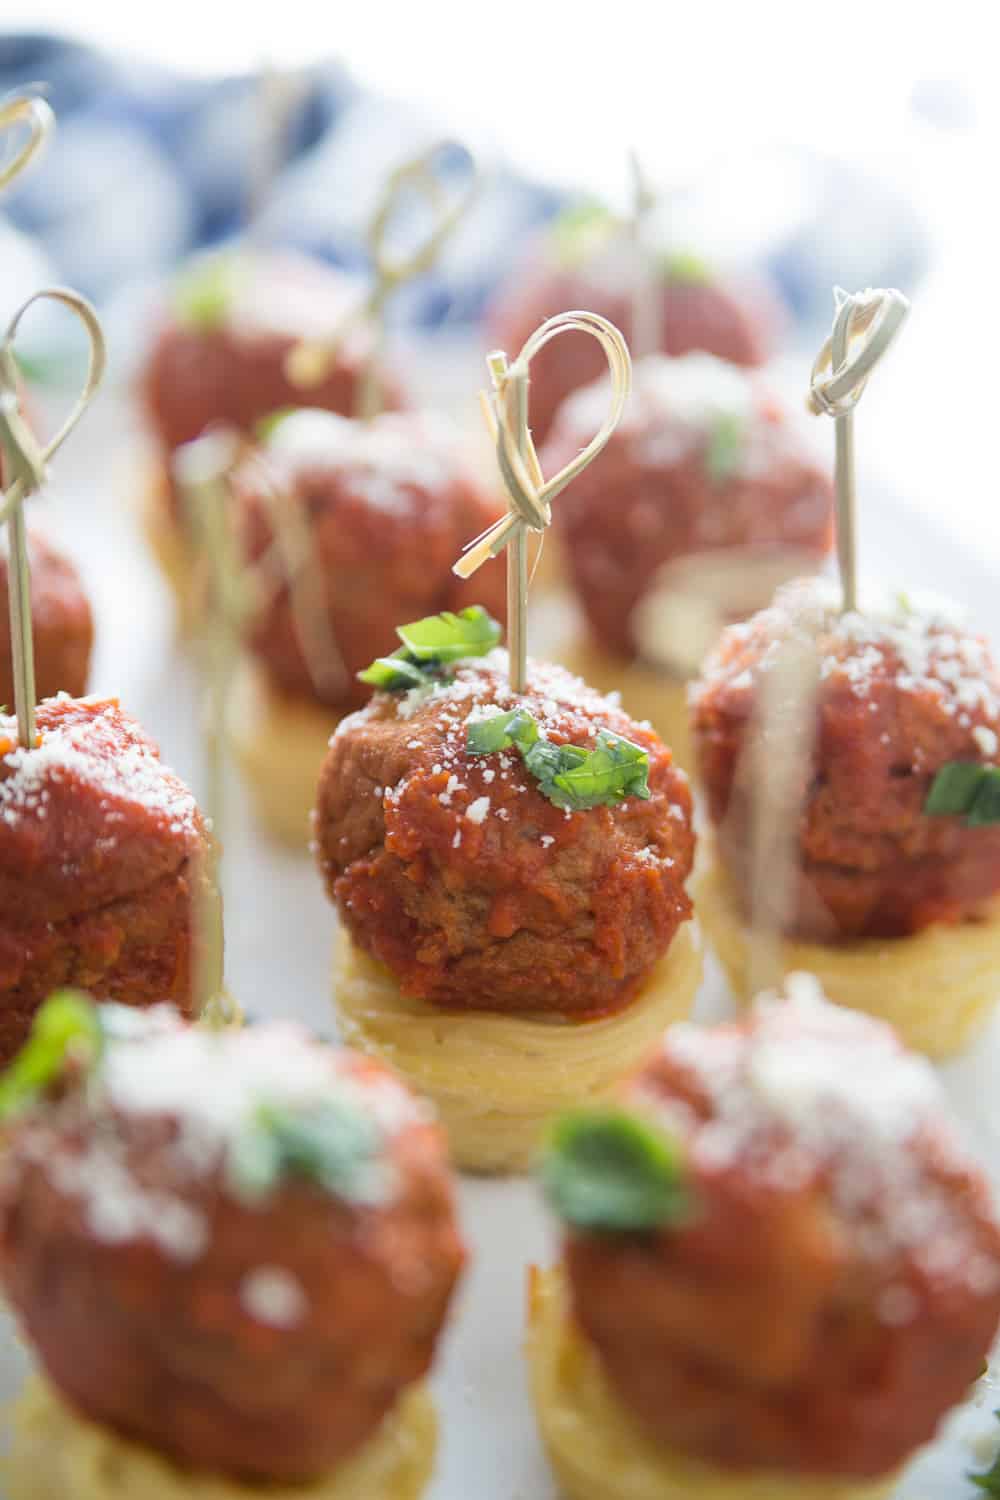 Spaghetti and Meatball Appetizers garnished with parmesan cheese and fresh basil